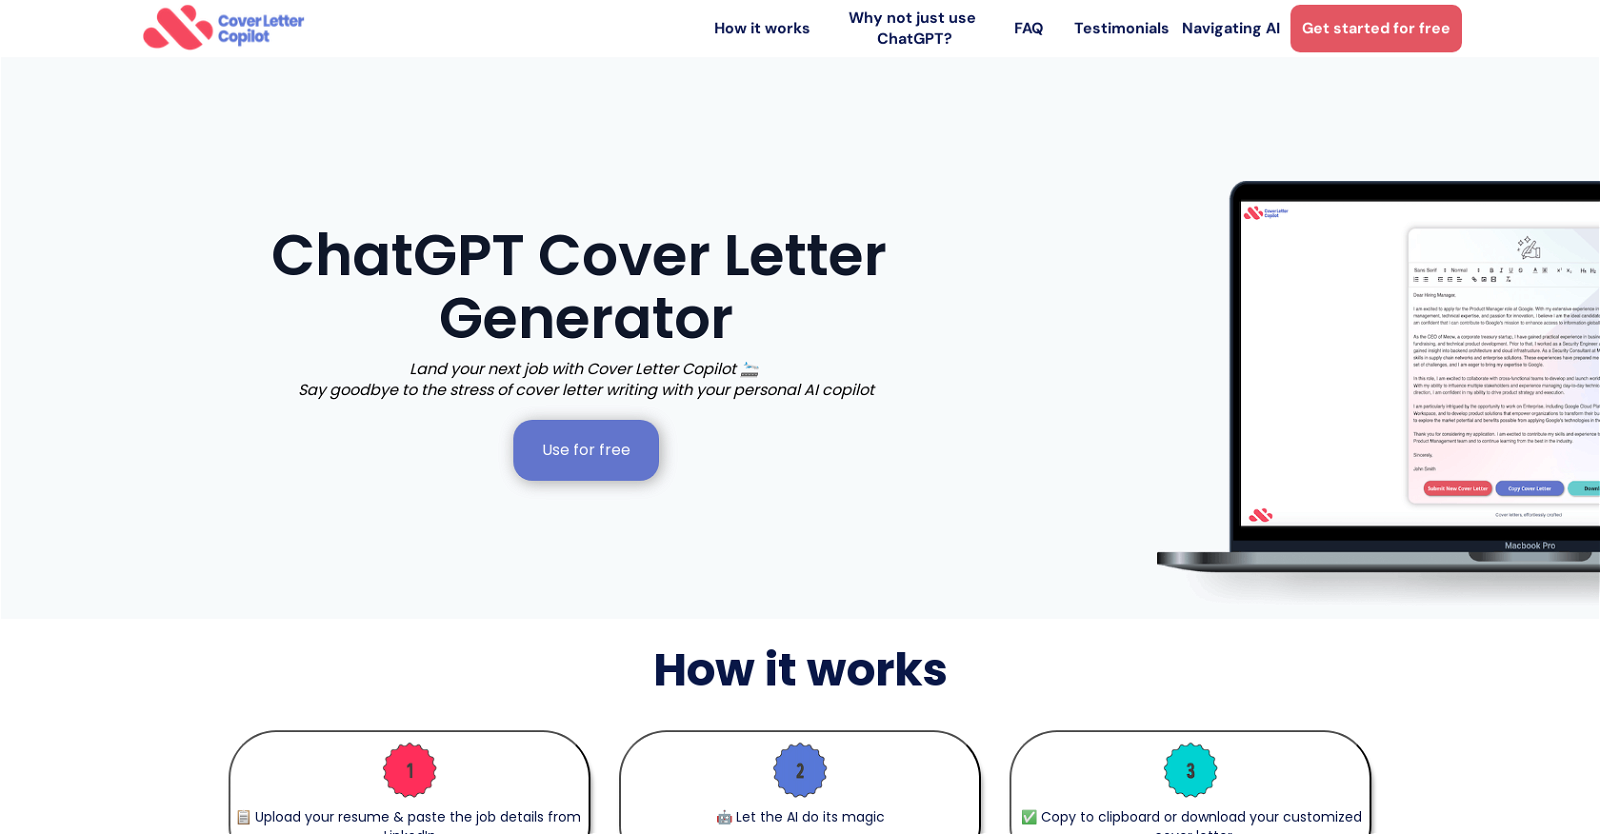 How to Use ChatGPT to Write Your Cover Letter